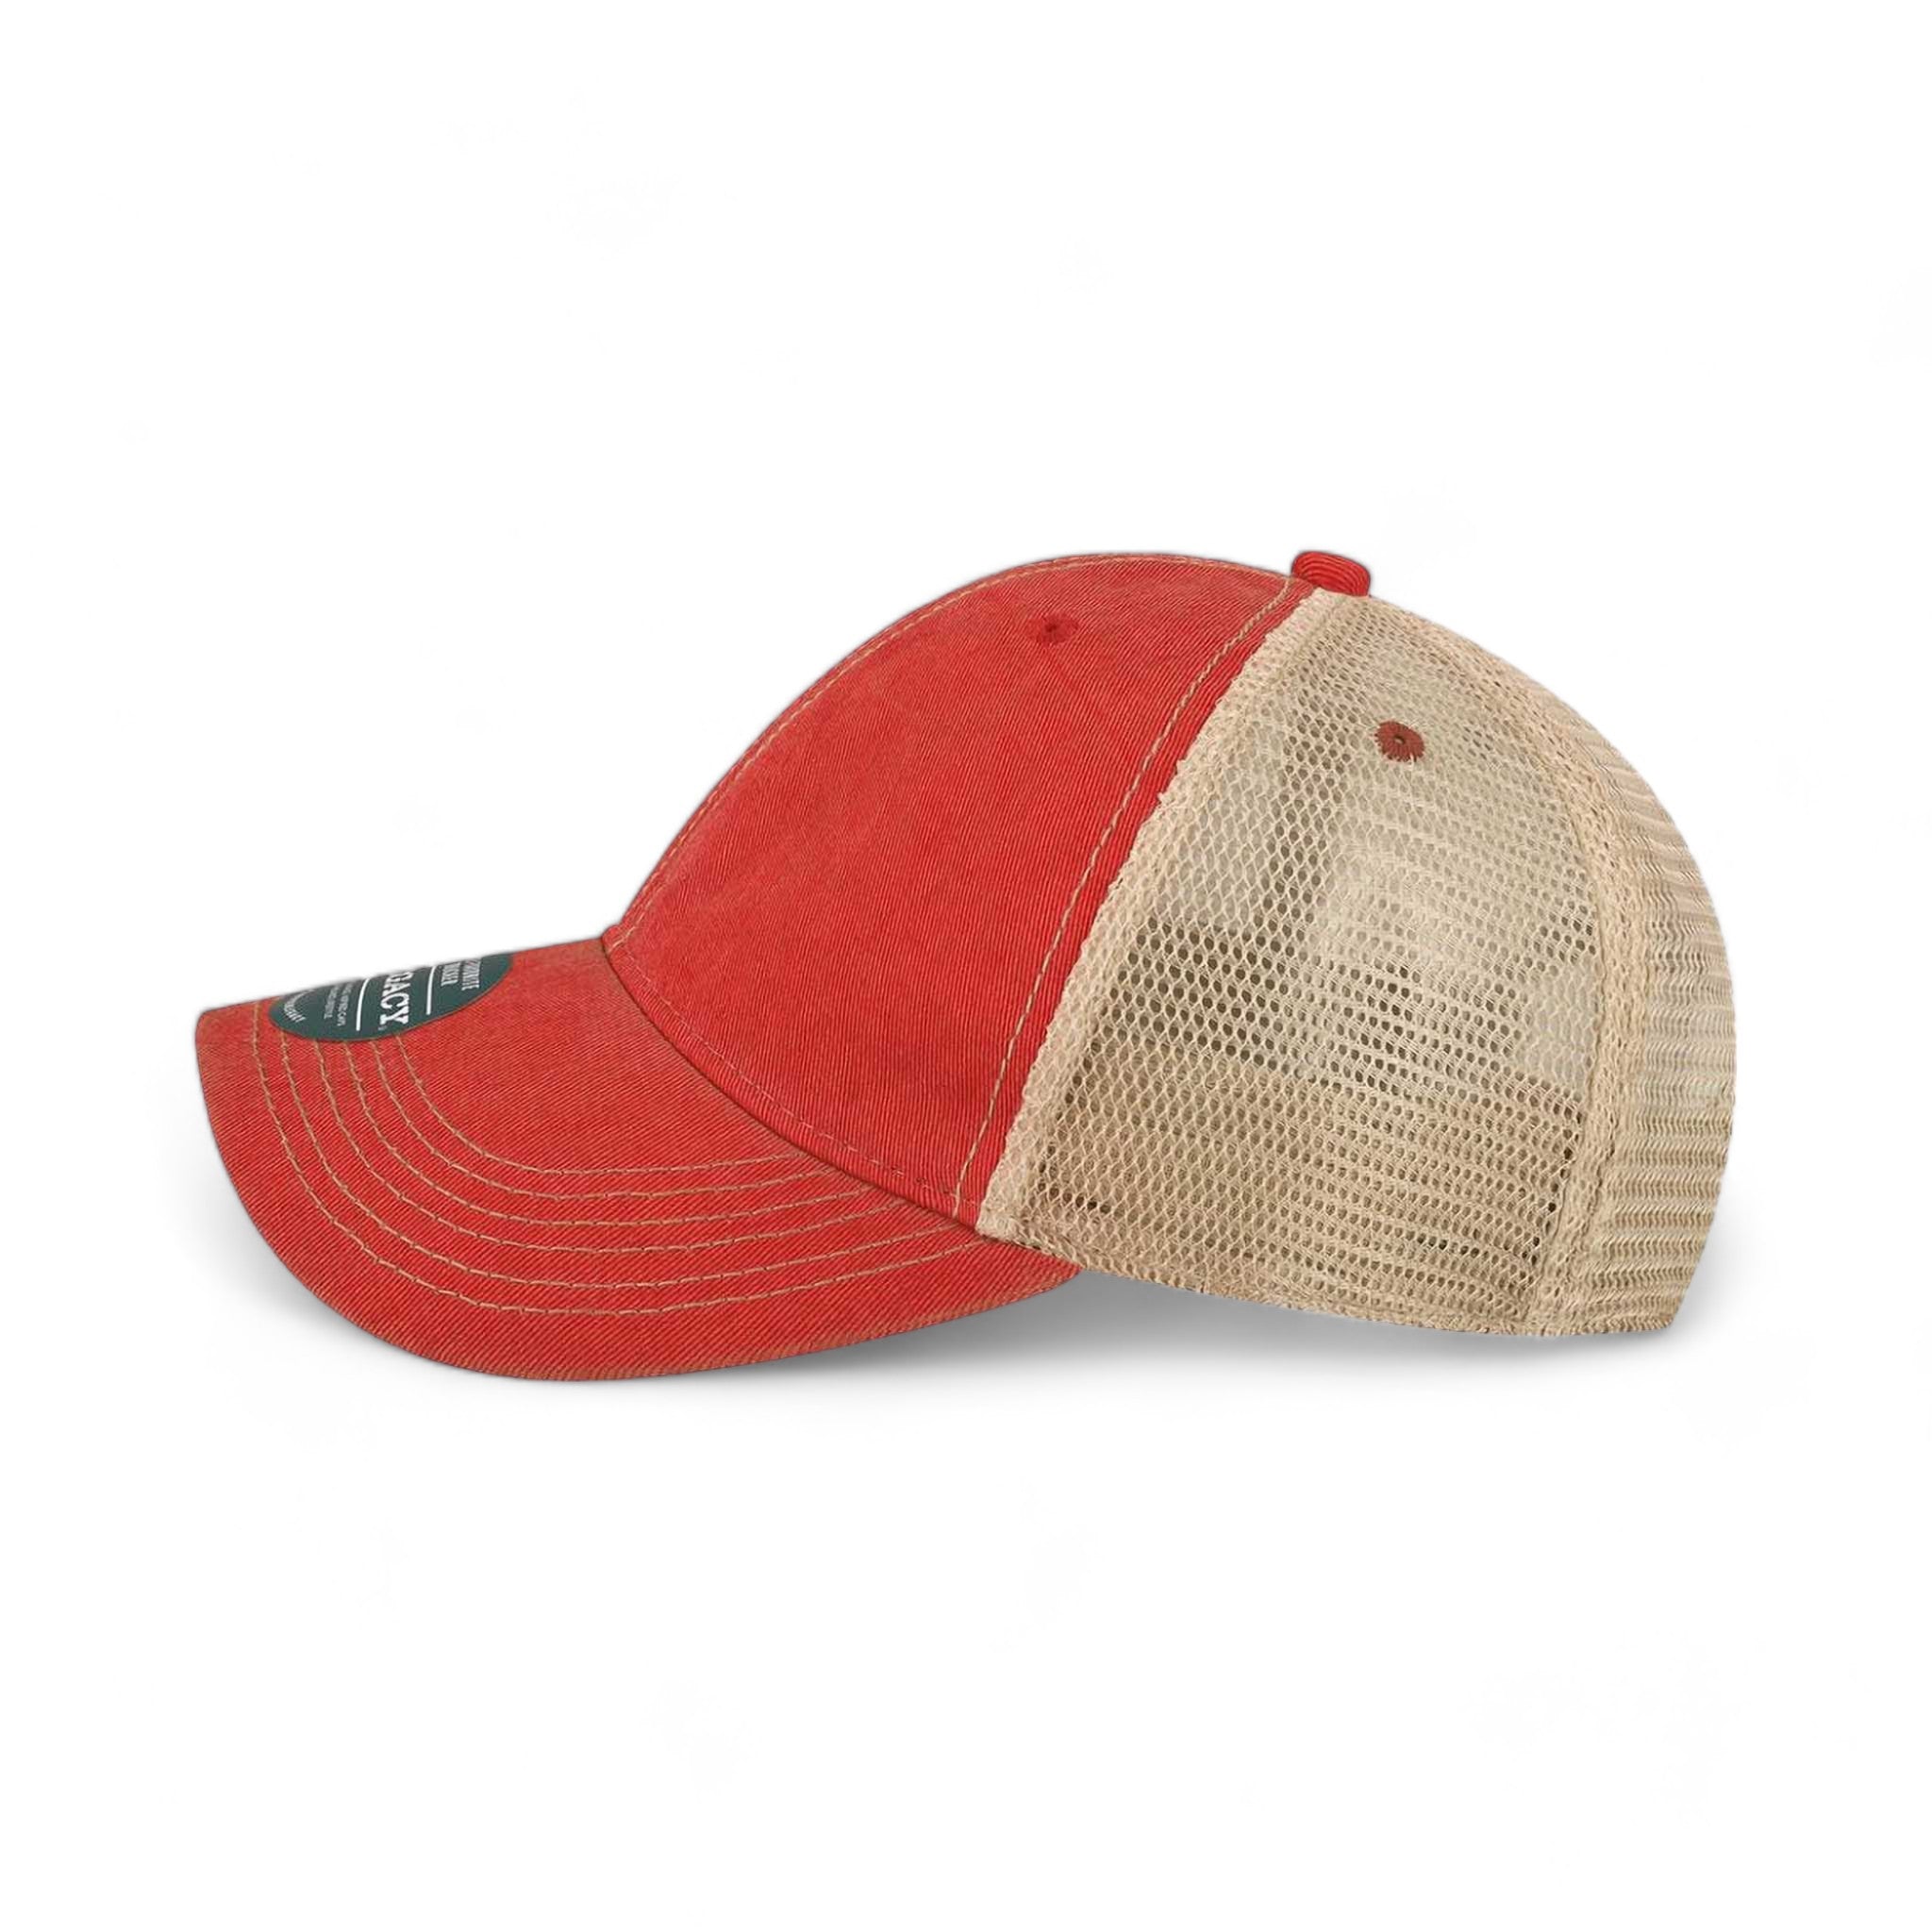 Side view of LEGACY OFAY custom hat in scarlet red and khaki